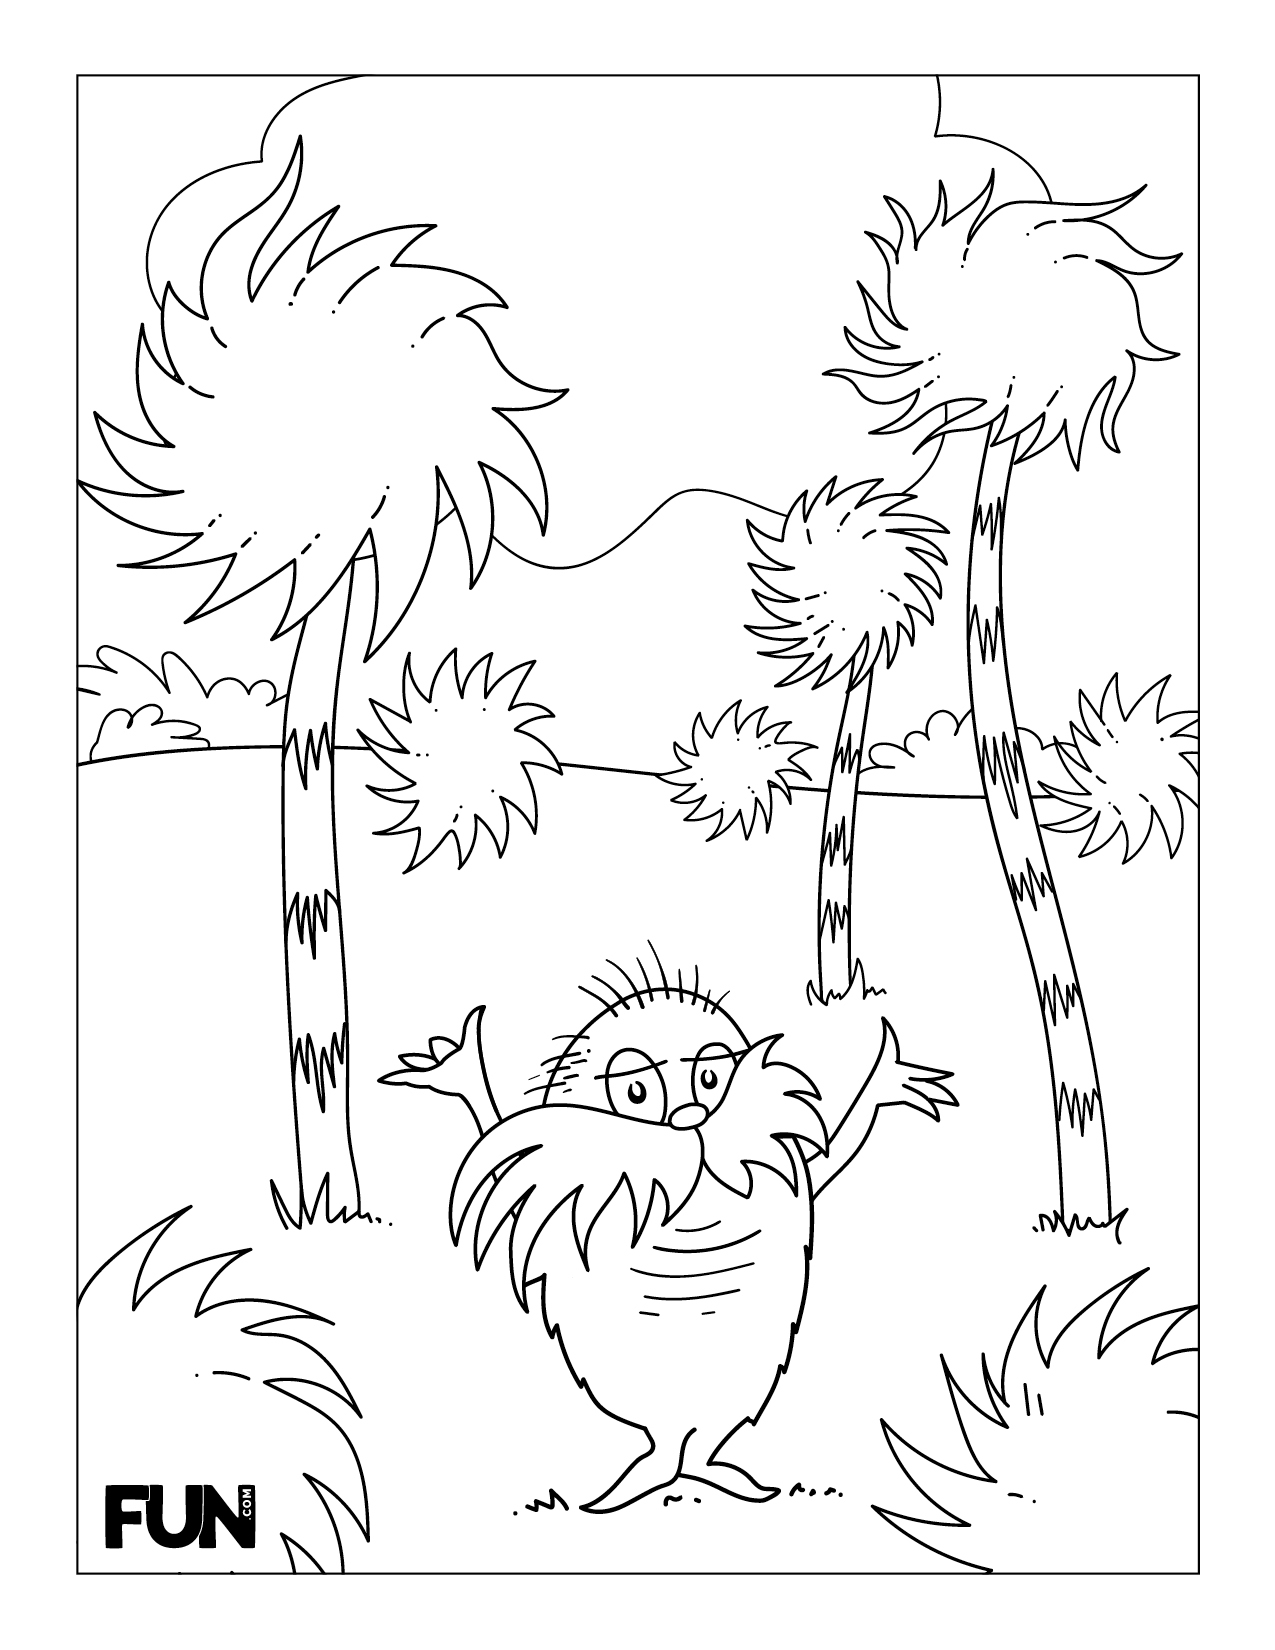 Dr seuss activities and printables